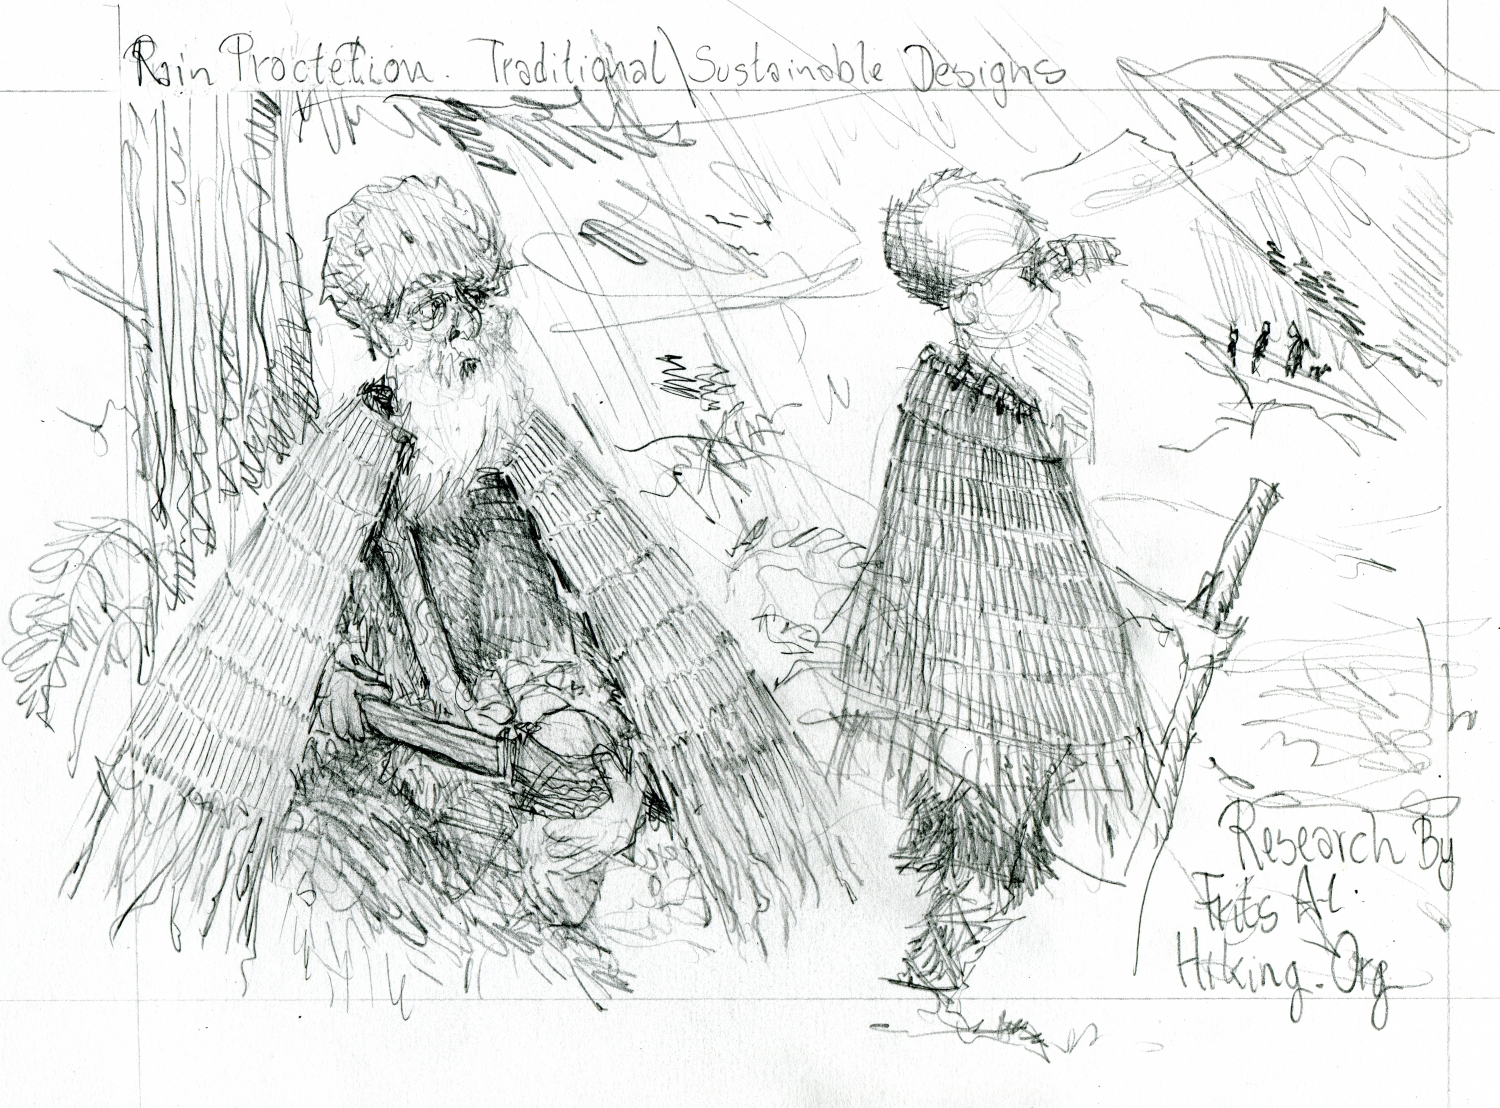 Ancient prehistoric man in eco rain garment Research sketch by Frits Ahlefeldt